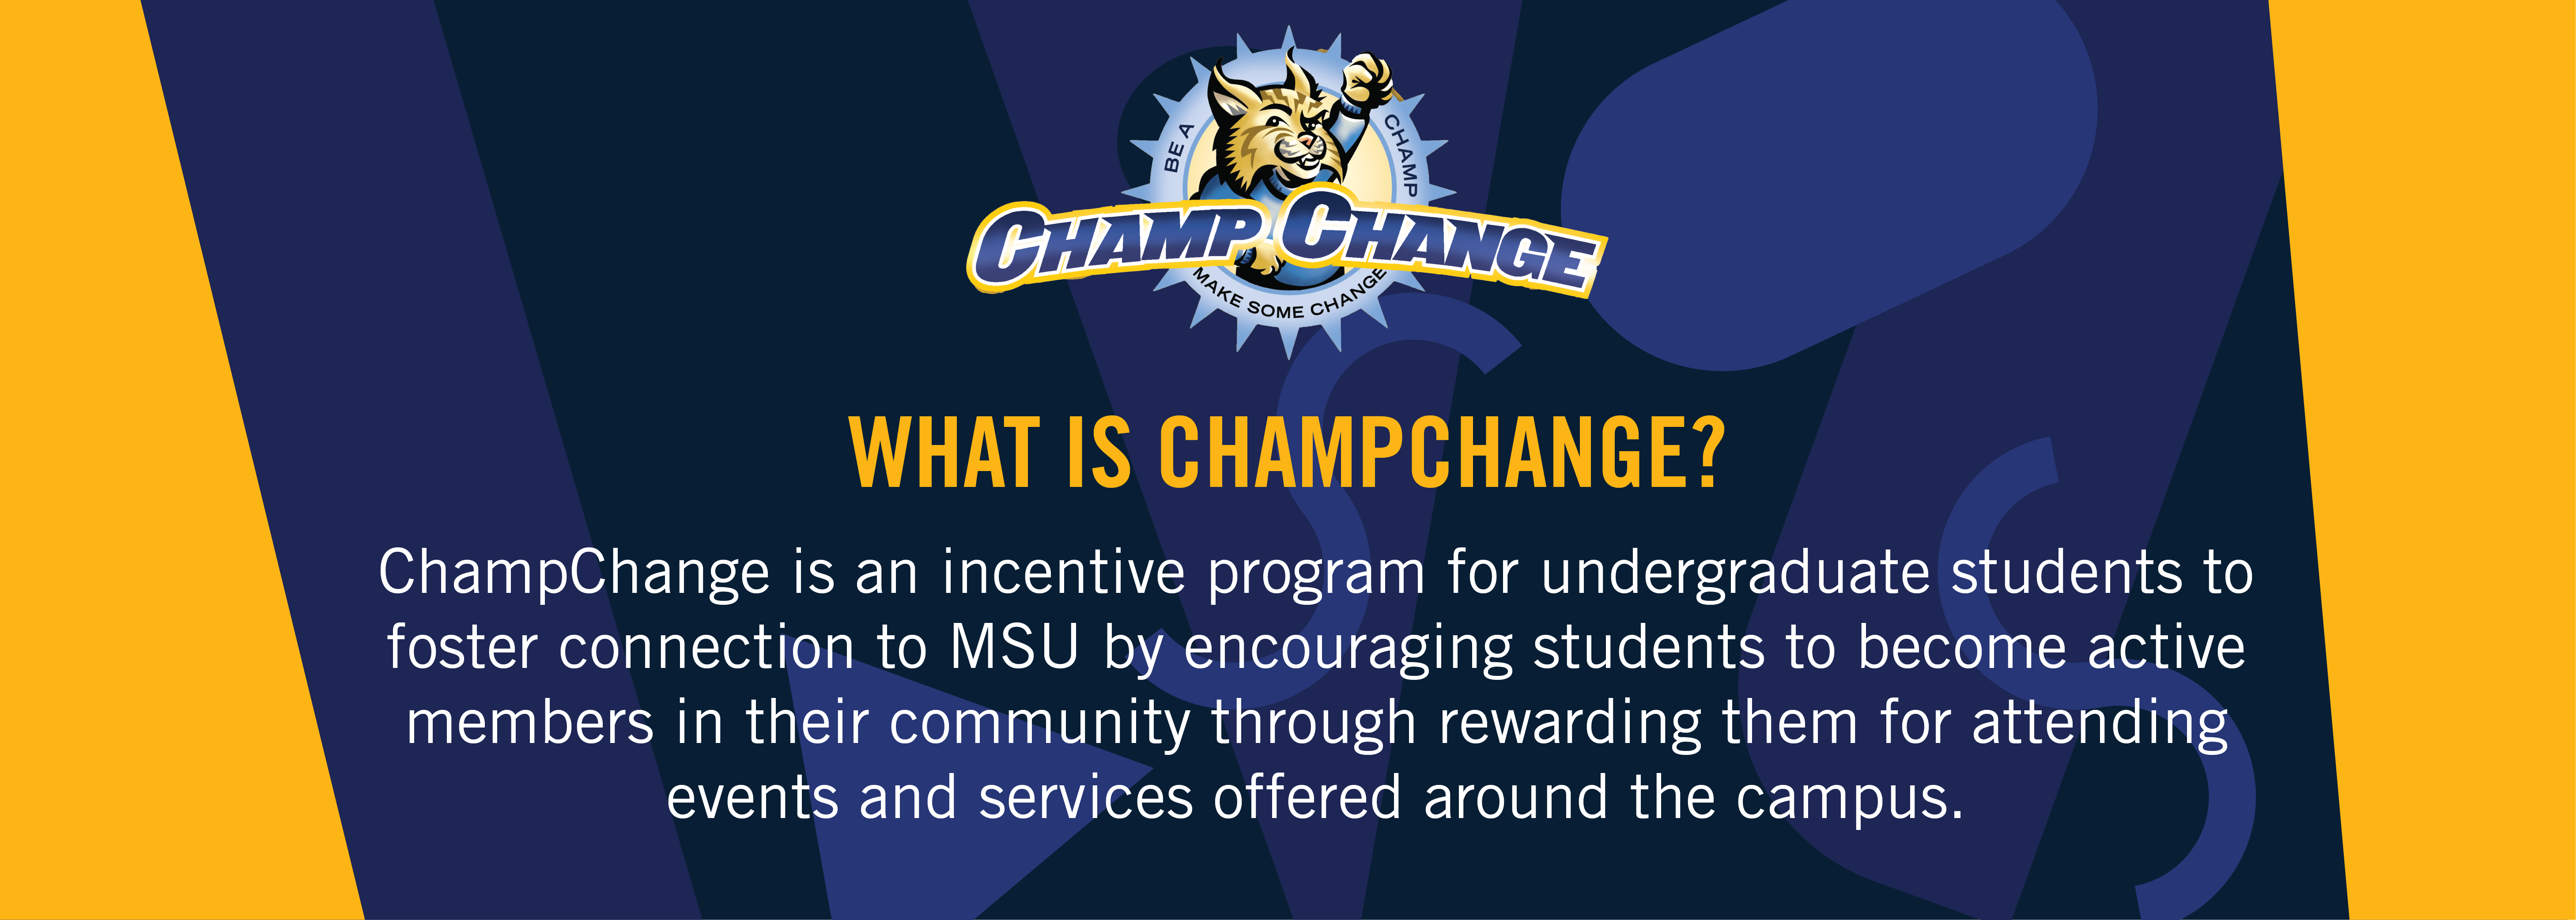 What is champchange